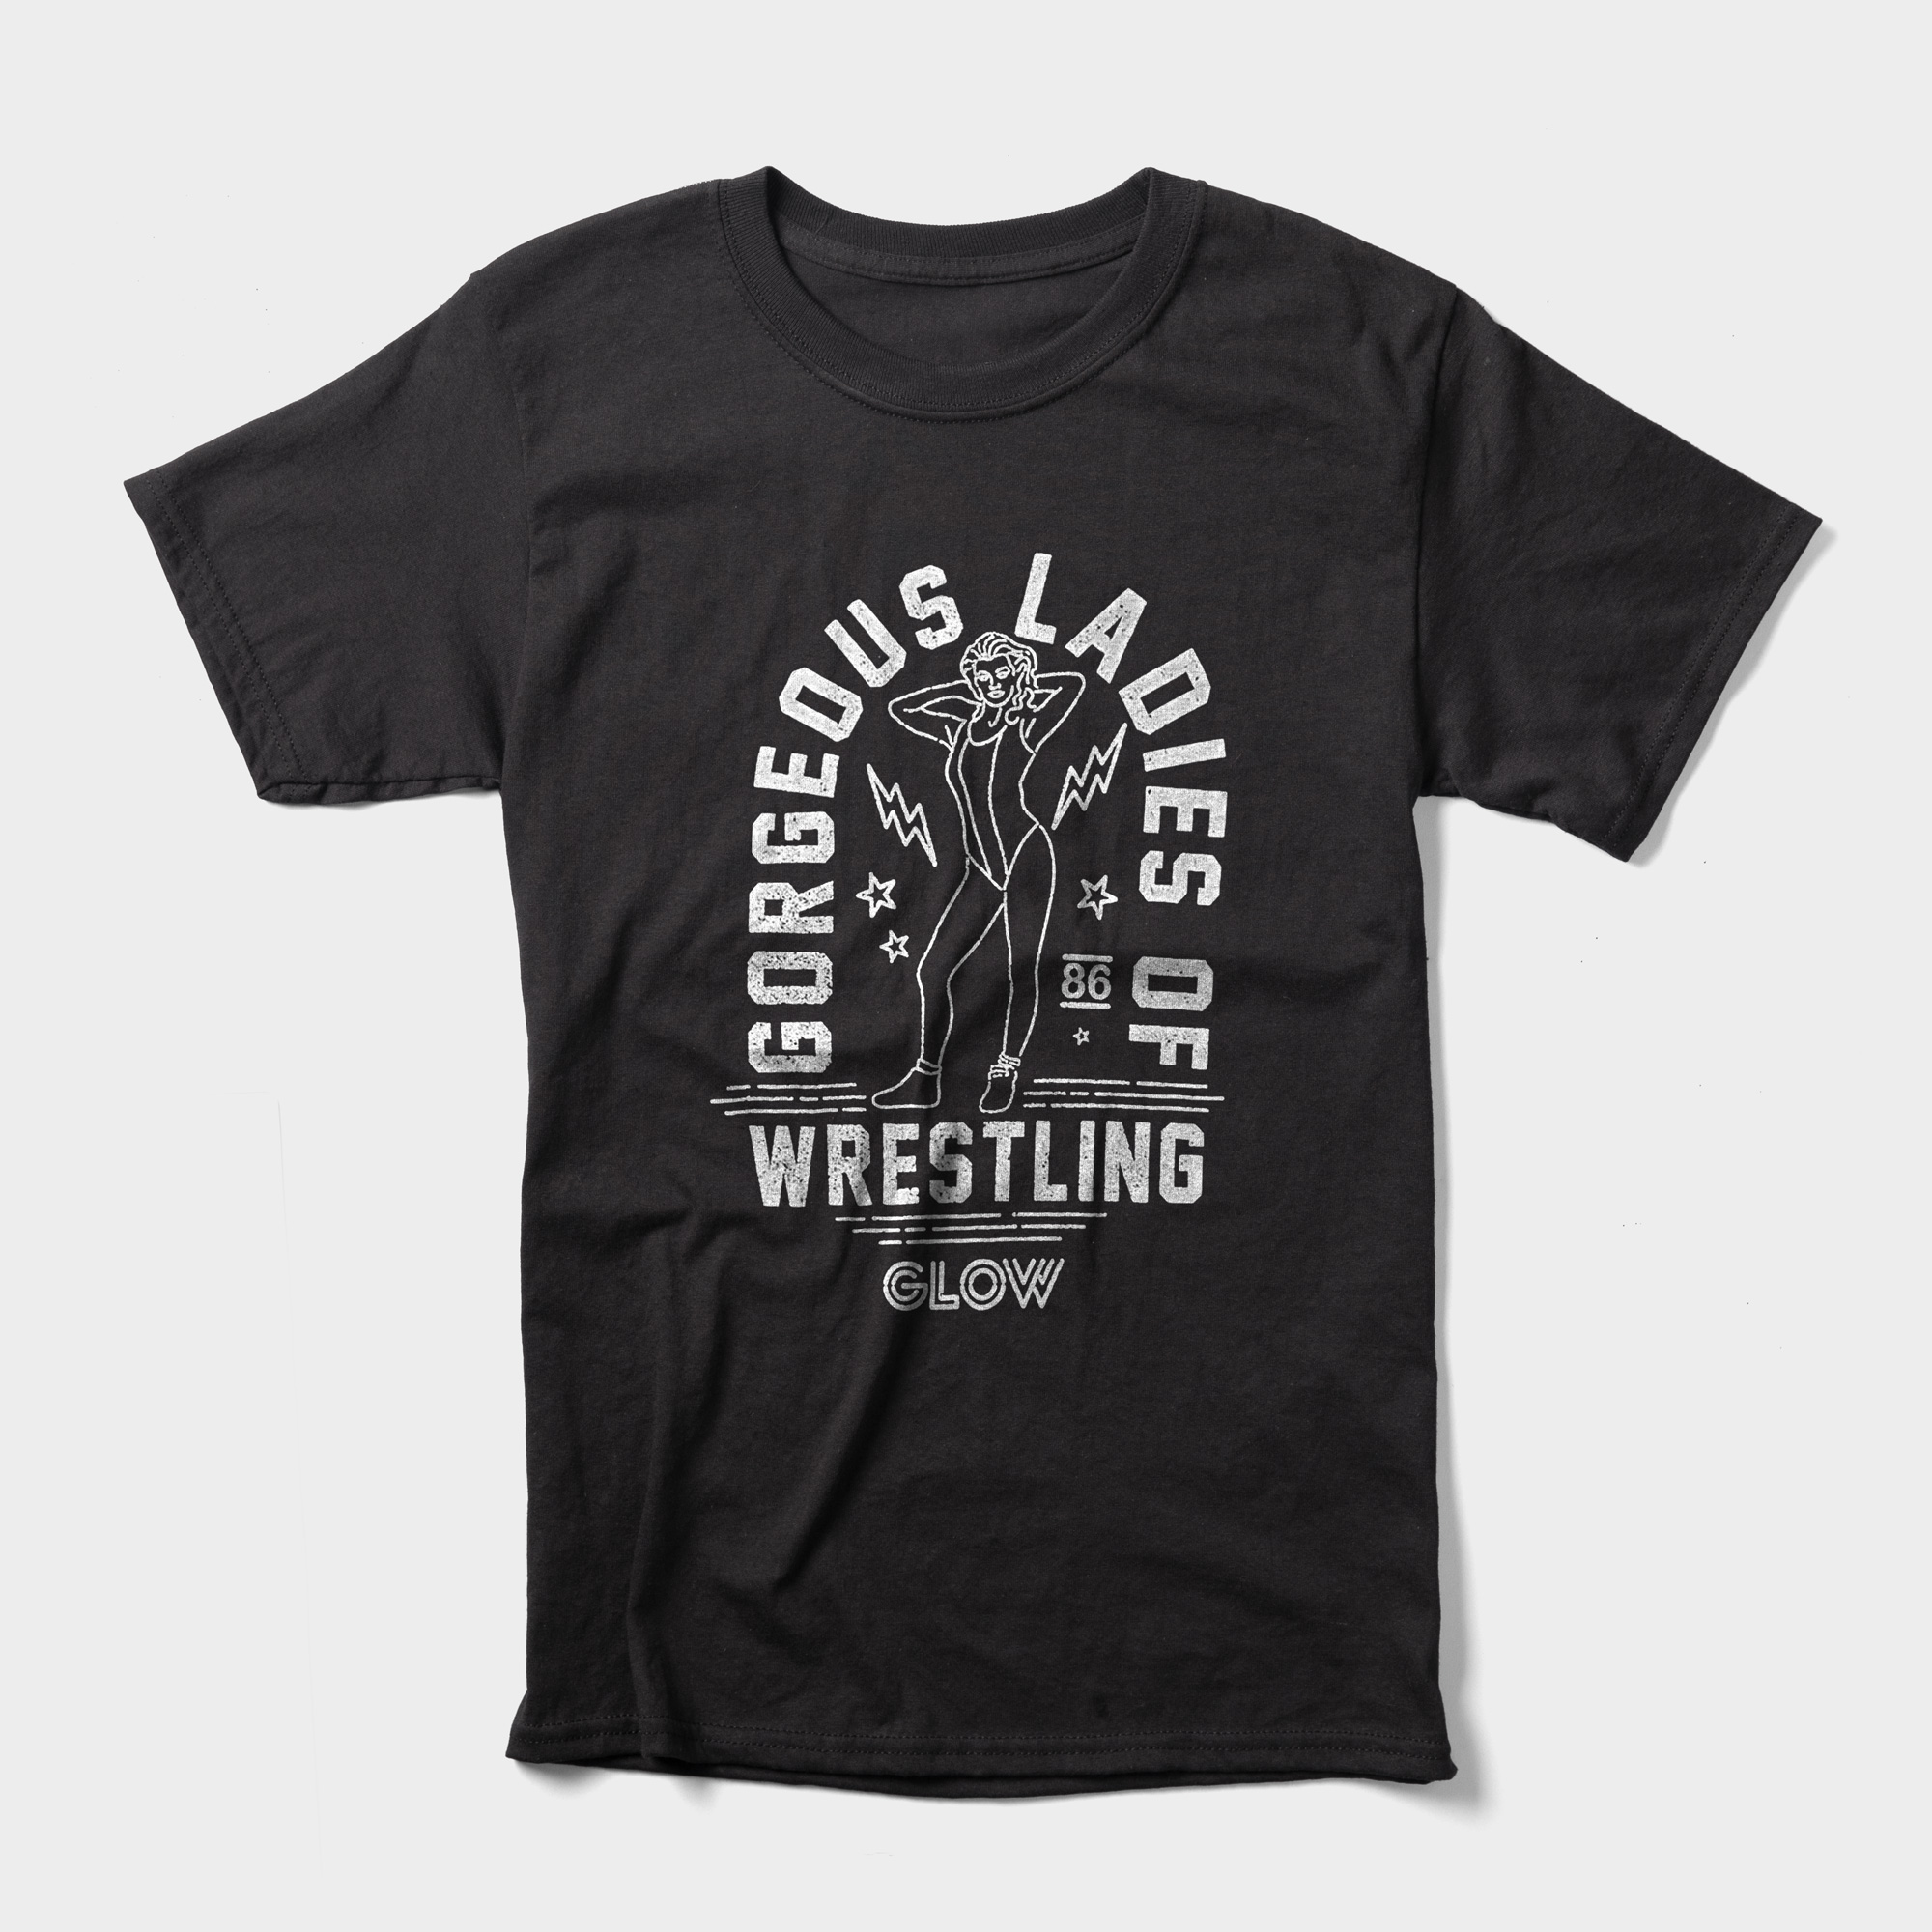 The Gorgeous Ladies of Wrestling shirt features their logo and an illustration of a strong female wrestler. 